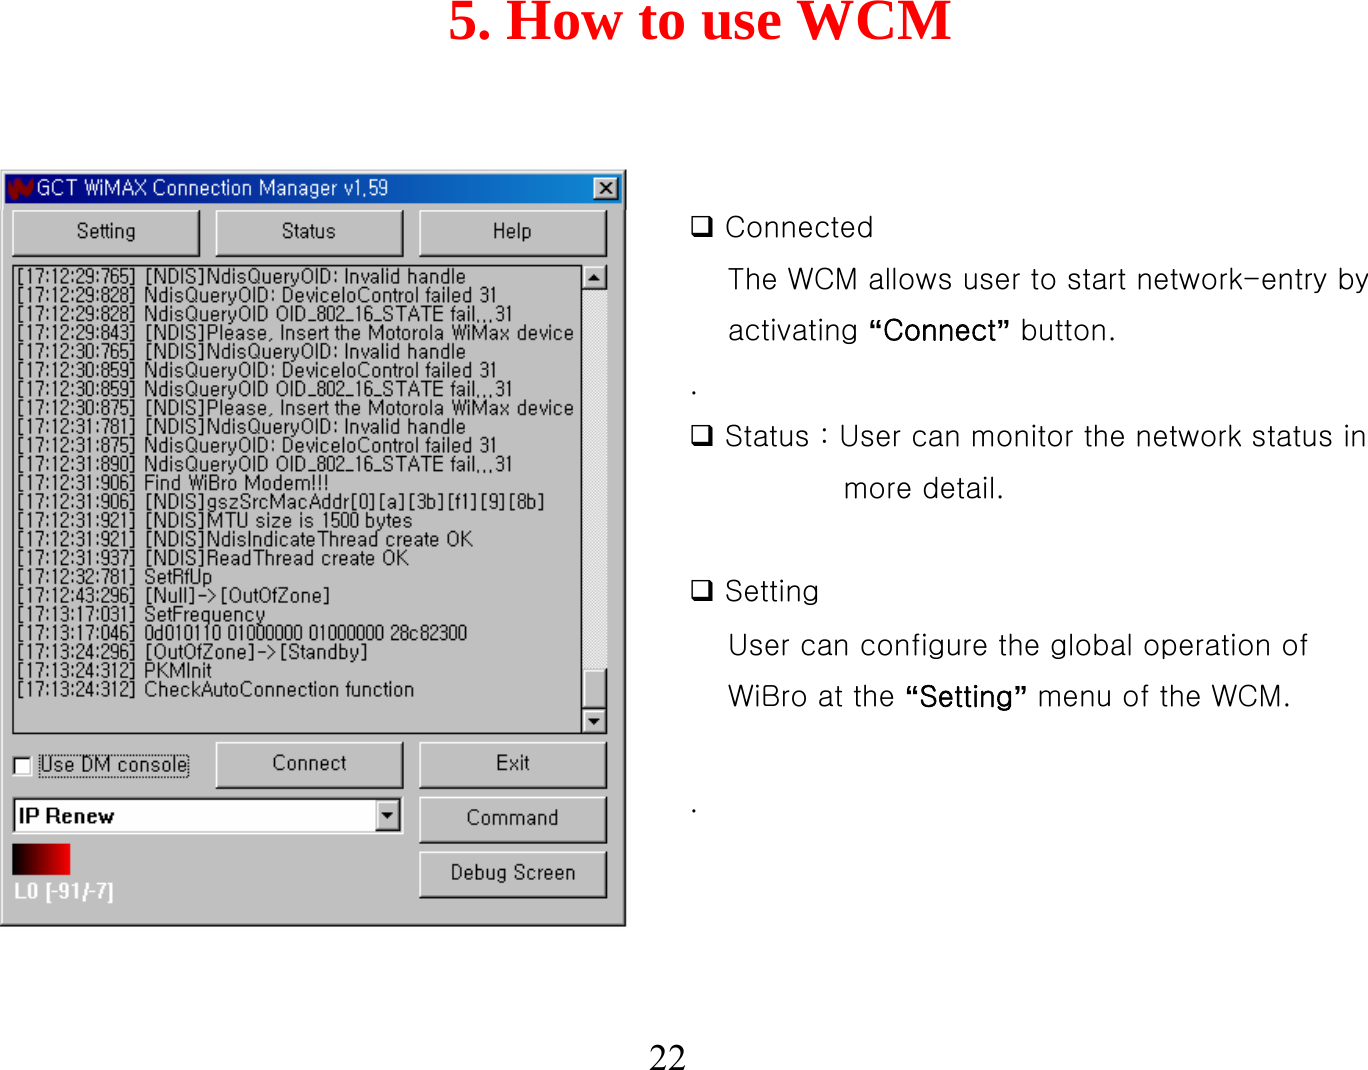 5. How to use WCM22ConnectedThe WCM allows user to start network-entry by activating “Connect”button..Status : User can monitor the network status in more detail.SettingUser can configure the global operation of WiBro at the “Setting”menu of the WCM. .